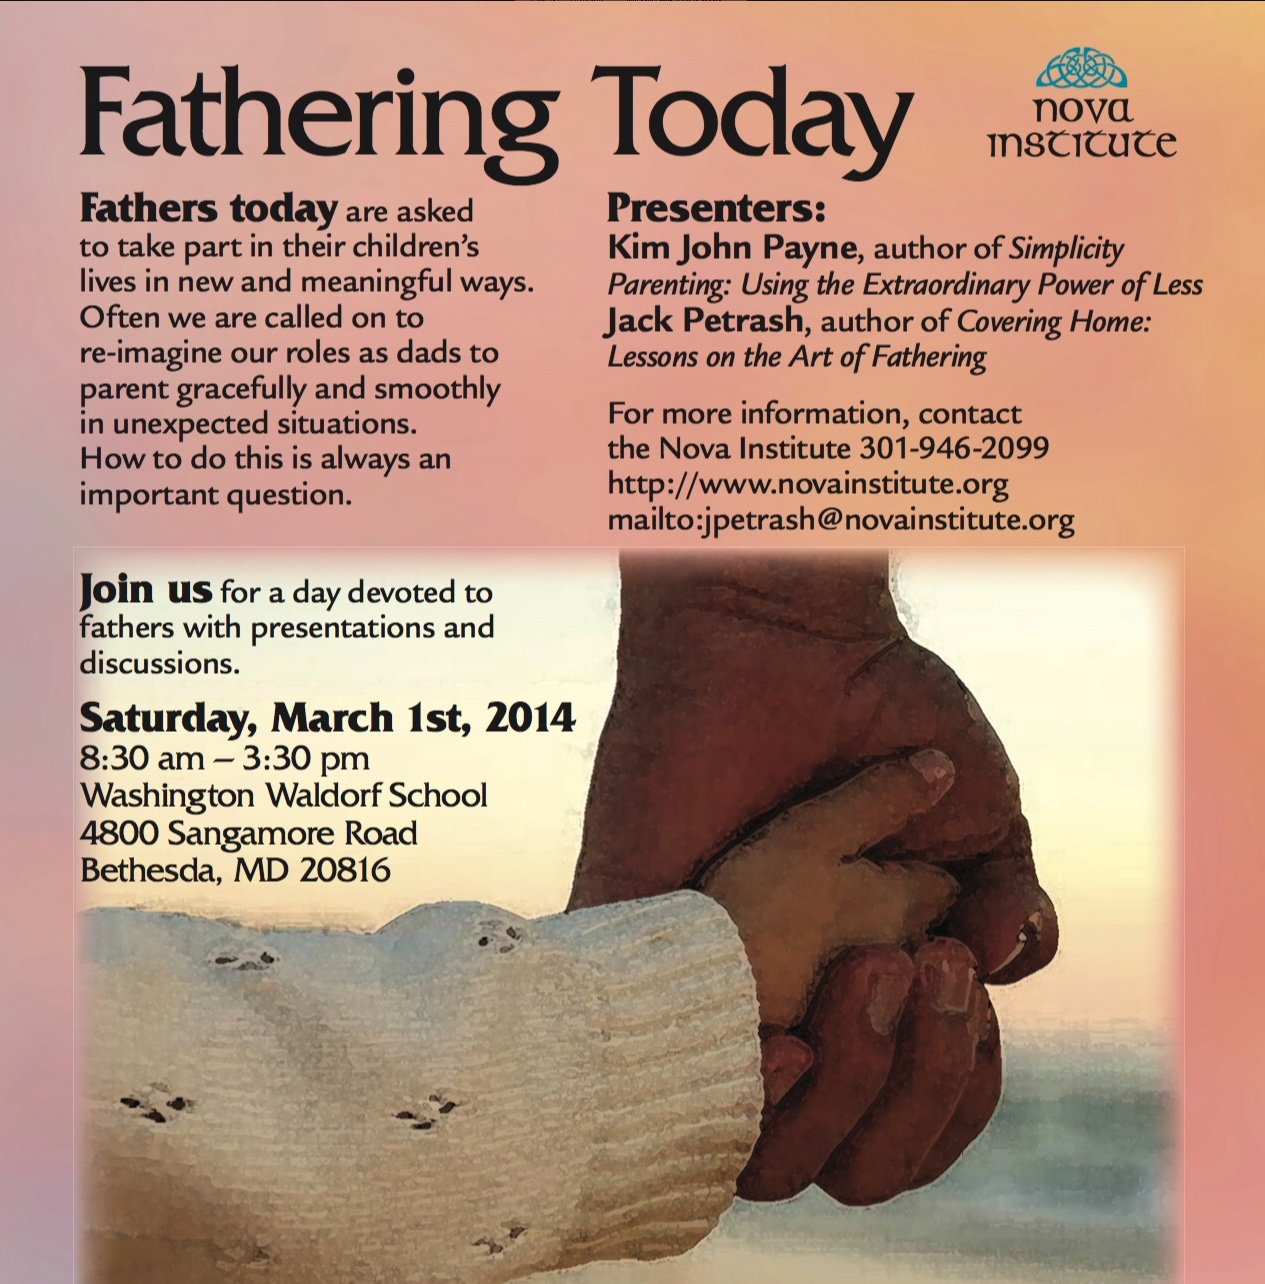 Fathering Today 2014 poster